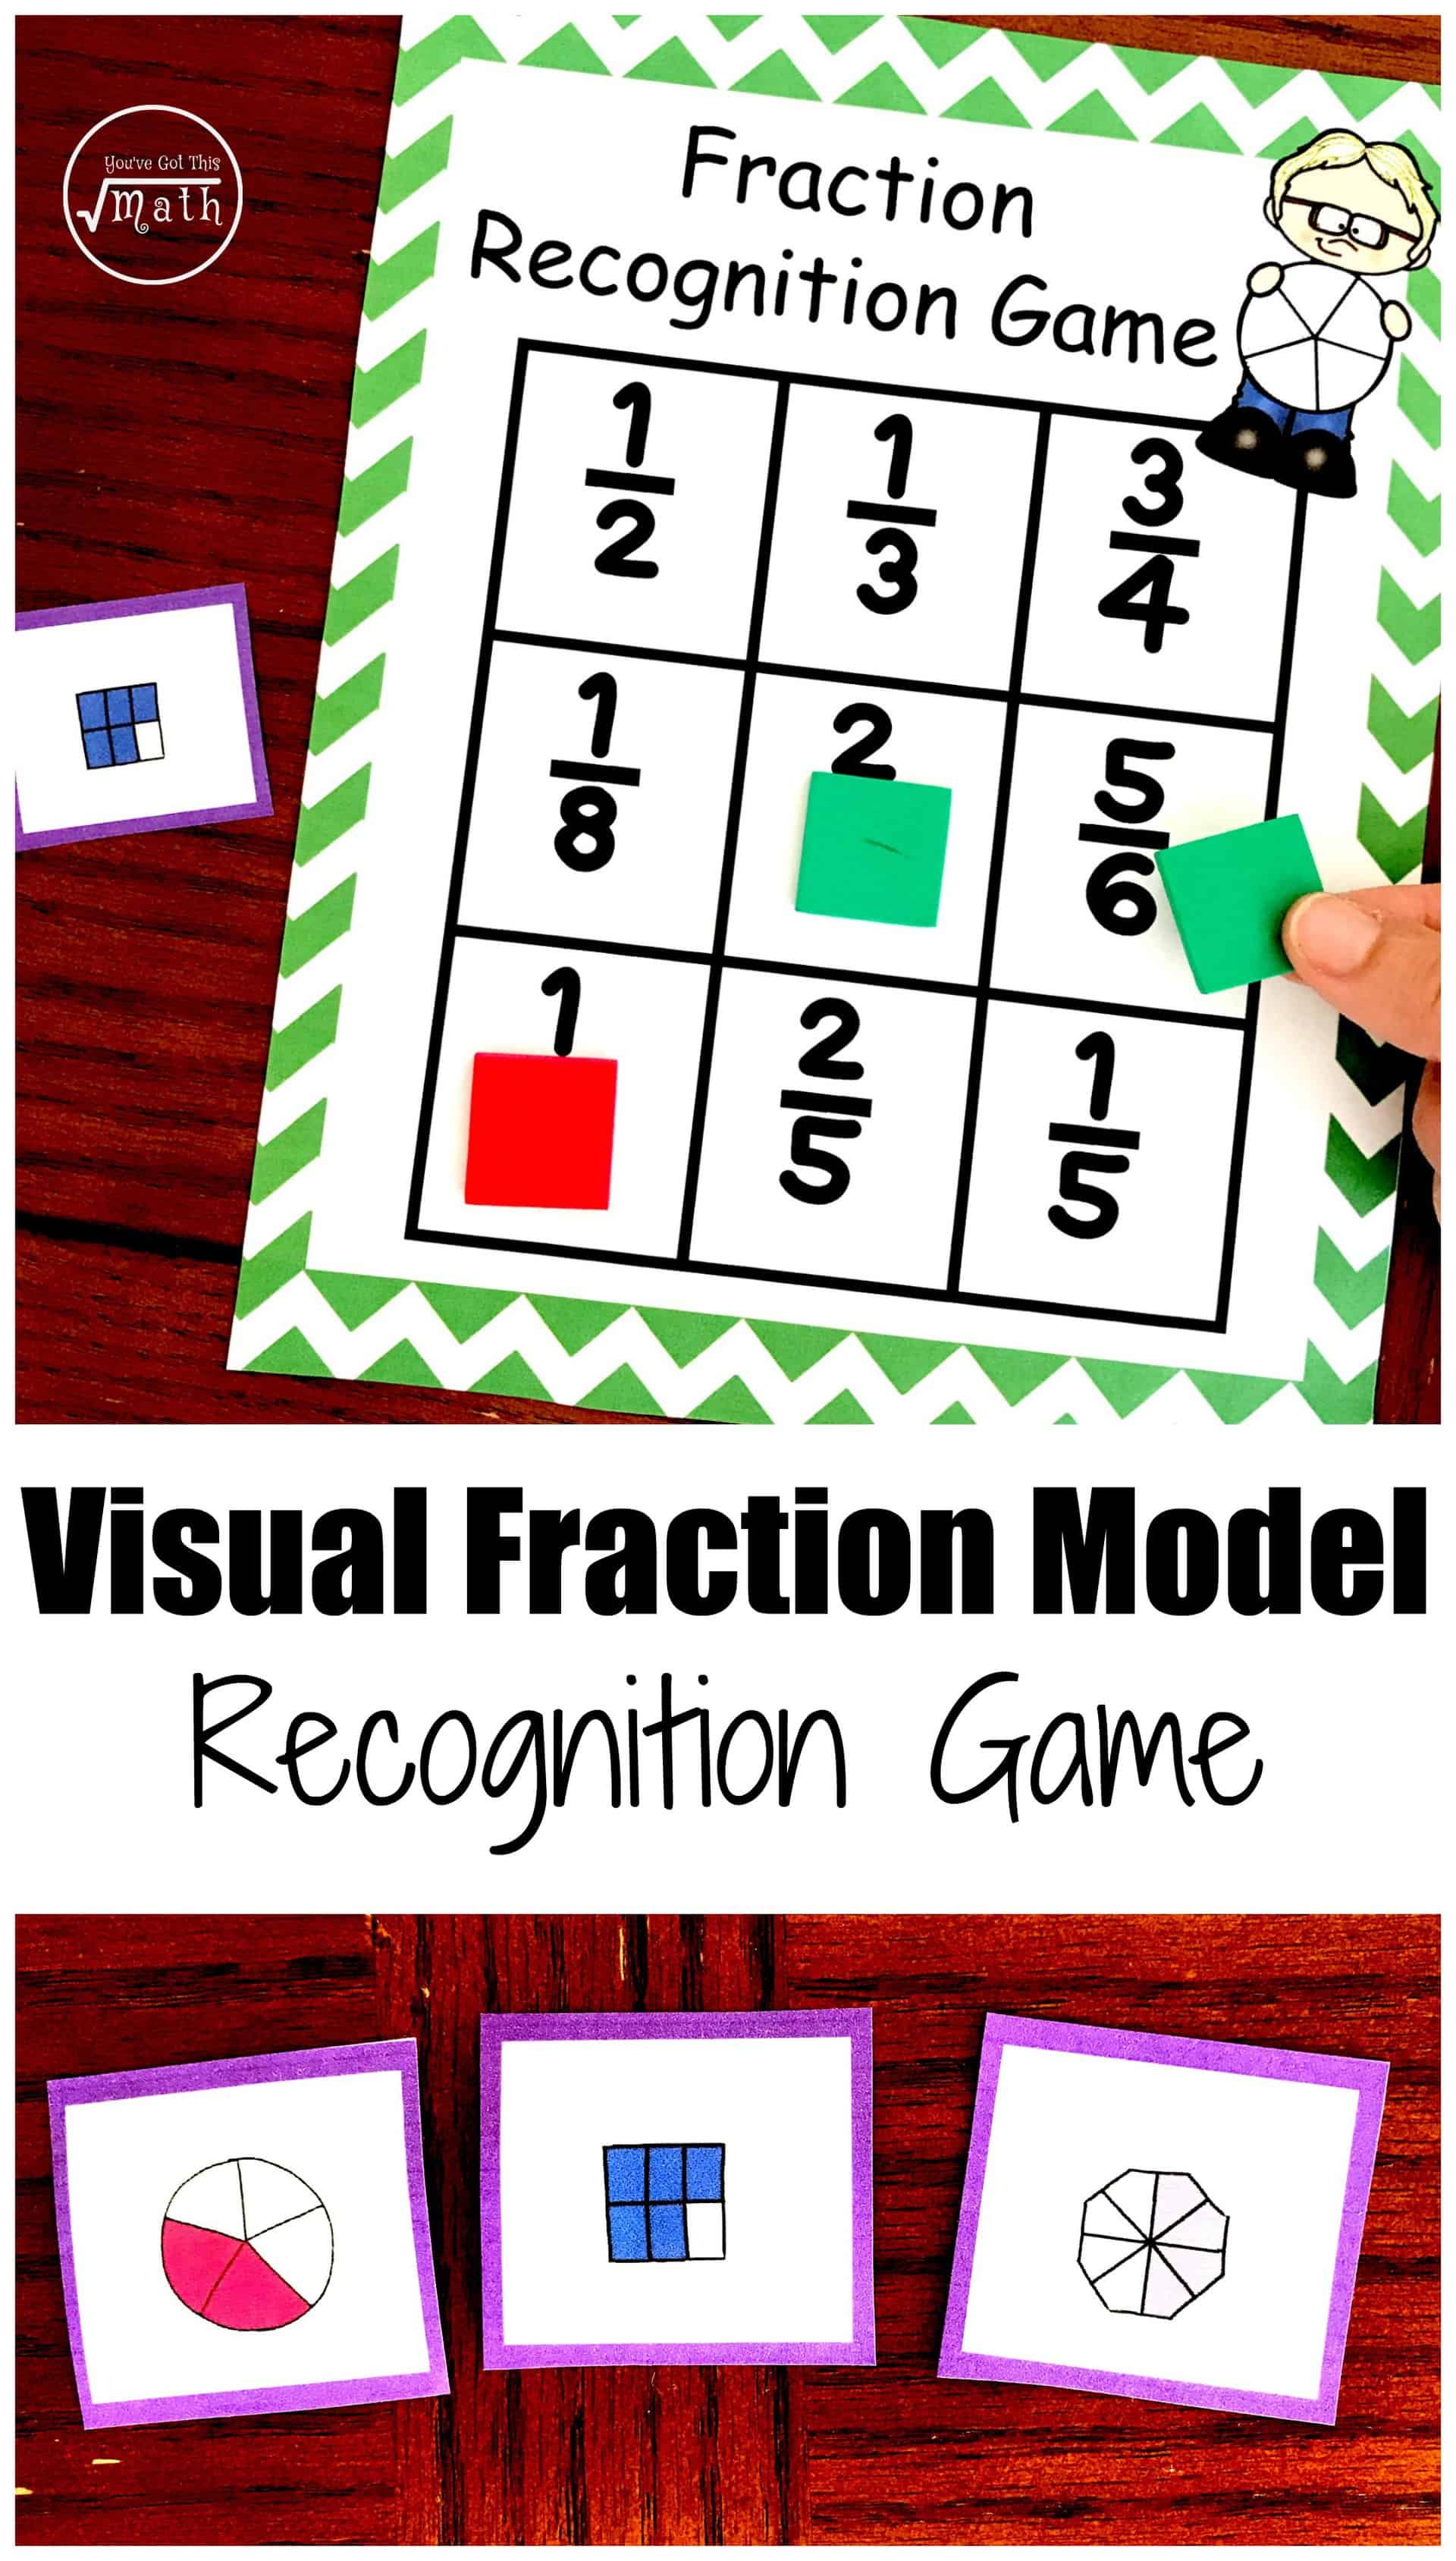 Visual Fraction Model game on a wooden service with game pieces and a hand holding a game piece. 